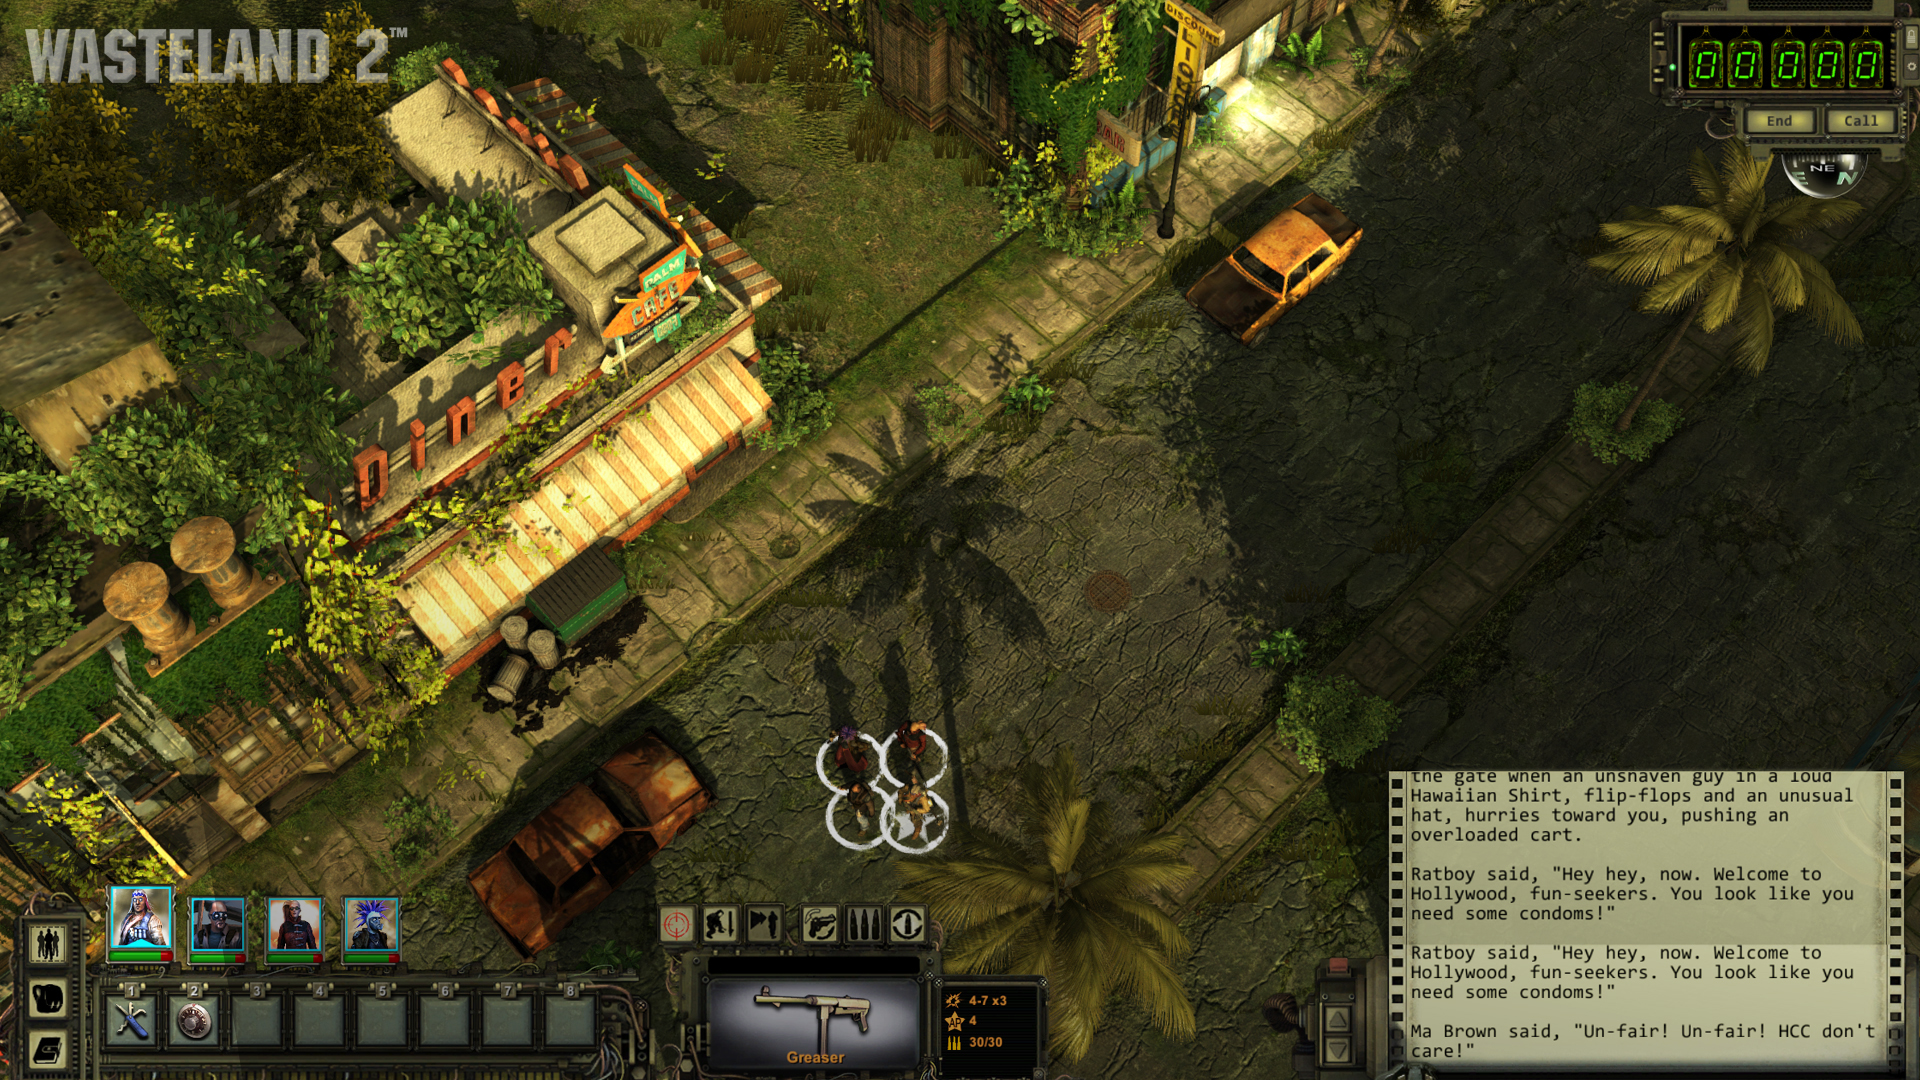 Wasteland 2 Backgrounds, Compatible - PC, Mobile, Gadgets| 1920x1080 px